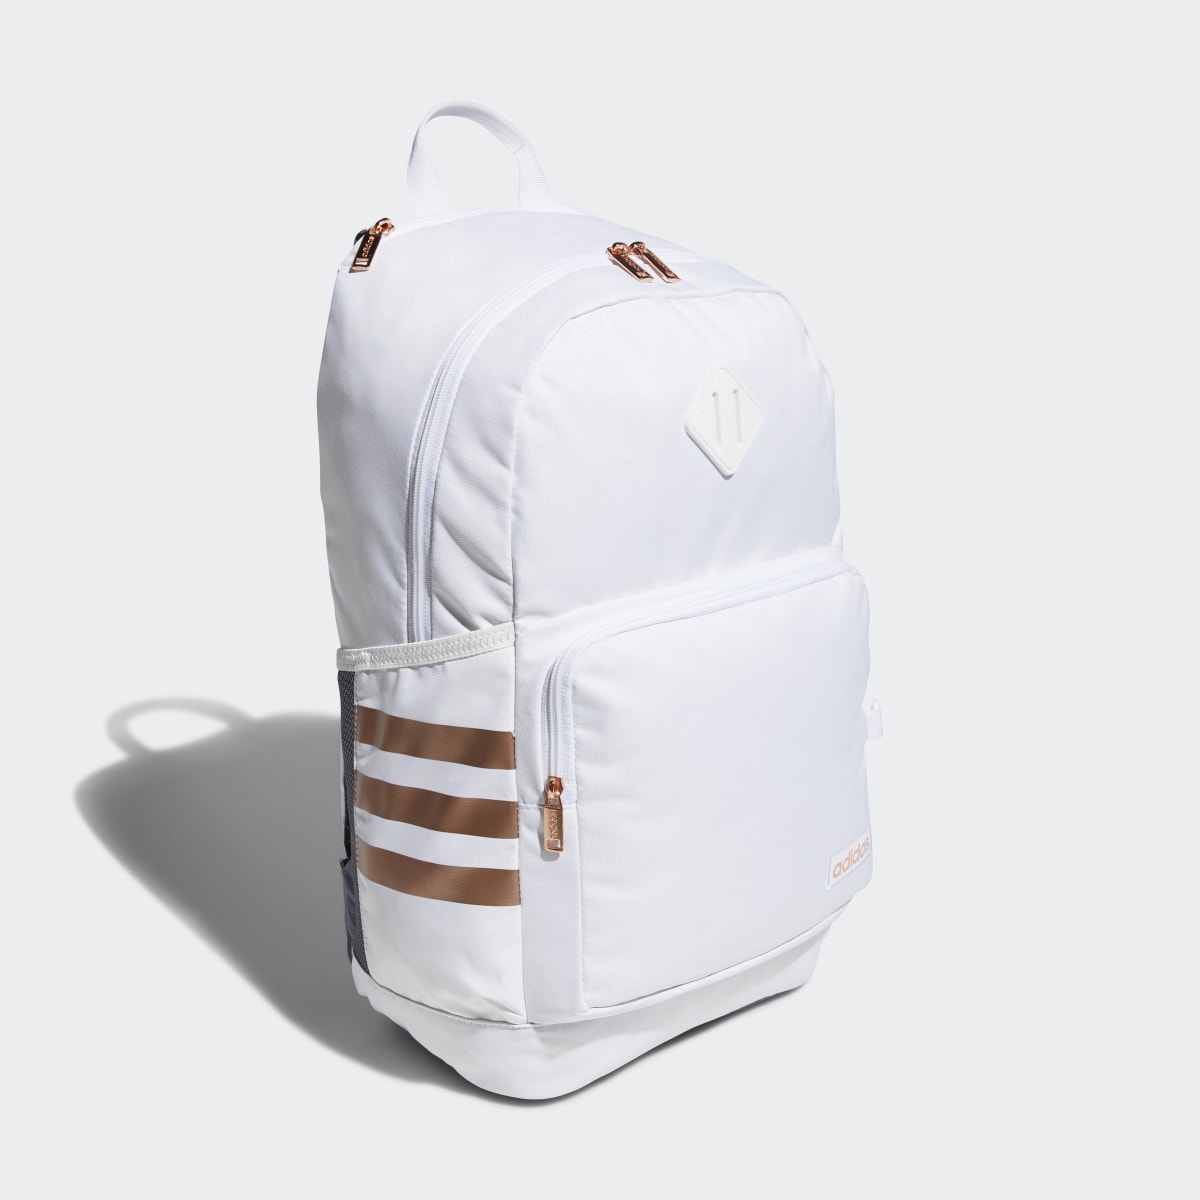 Adidas Classic 3-Stripes Backpack. 4